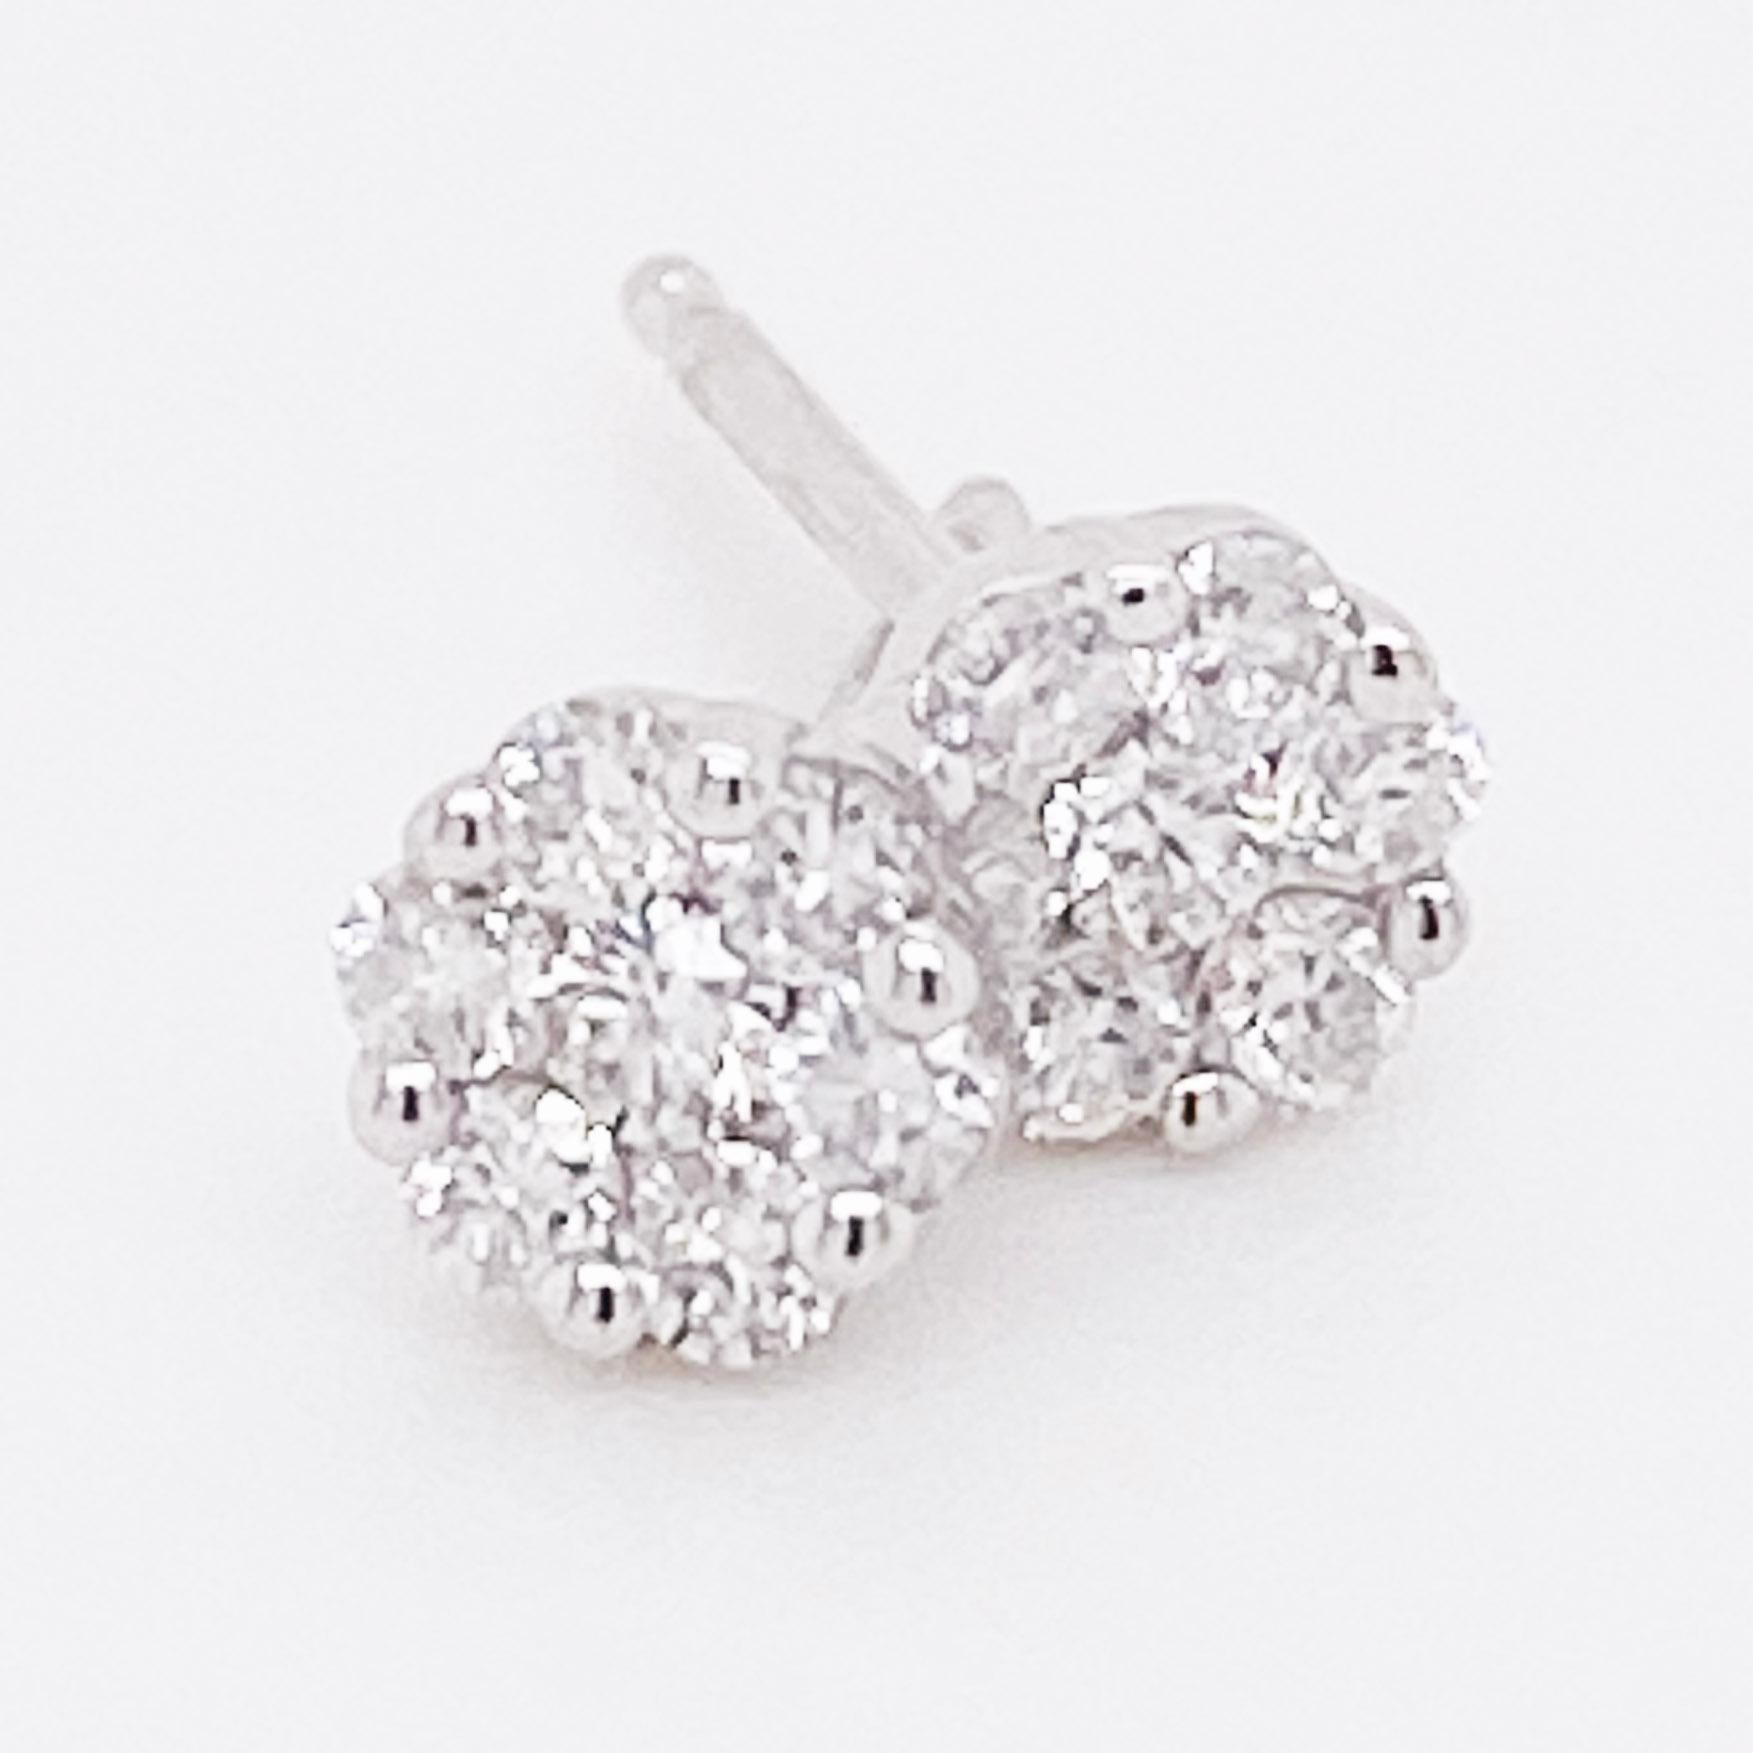 Round Cut Diamond Cluster Earrings, White Gold Diamond Stud Earrings, Dainty Earrings For Sale